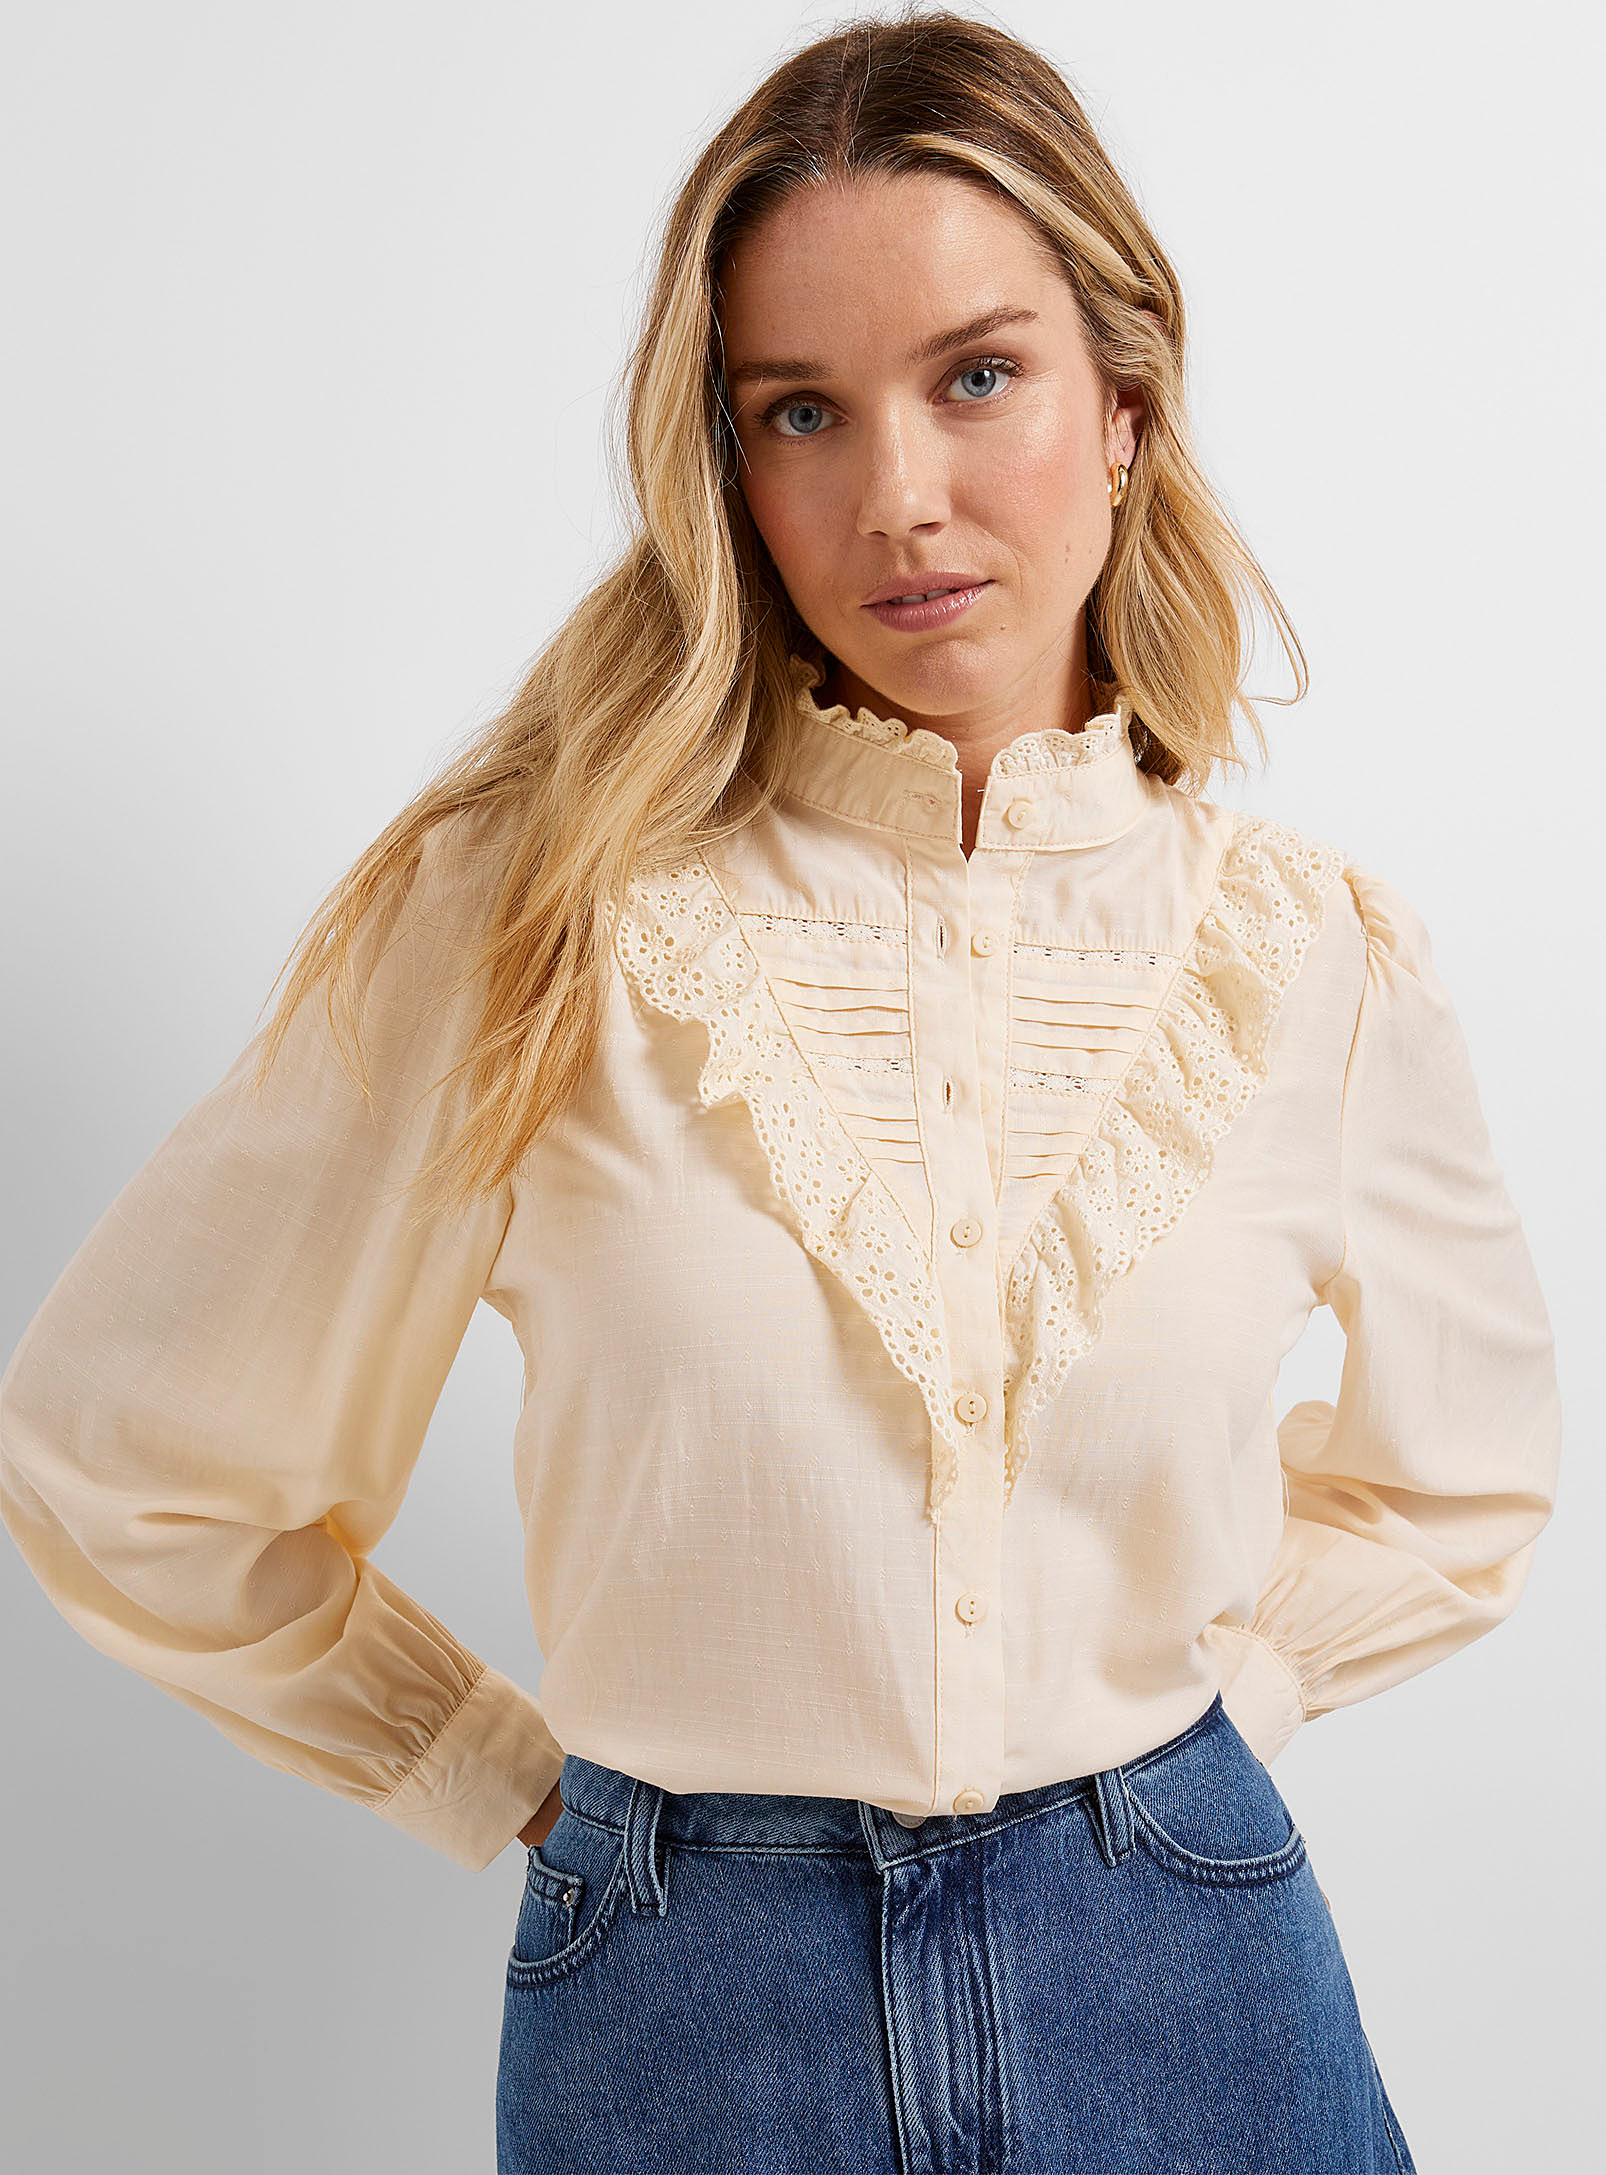 Contemporaine - Women's Broderie anglaise ruffled blouse